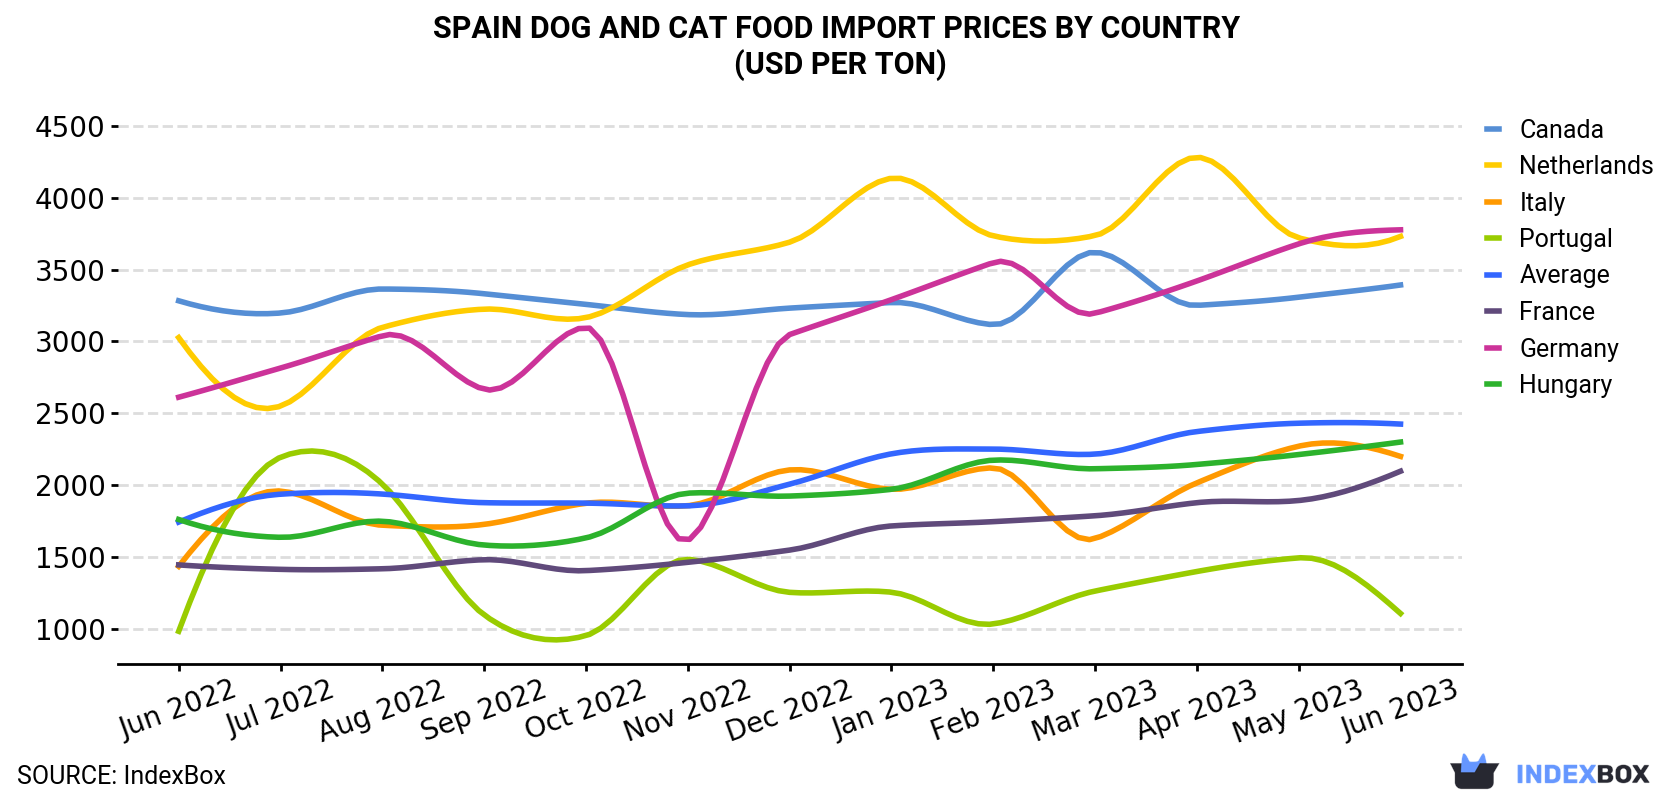 Spain Dog And Cat Food Import Prices By Country (USD Per Ton)